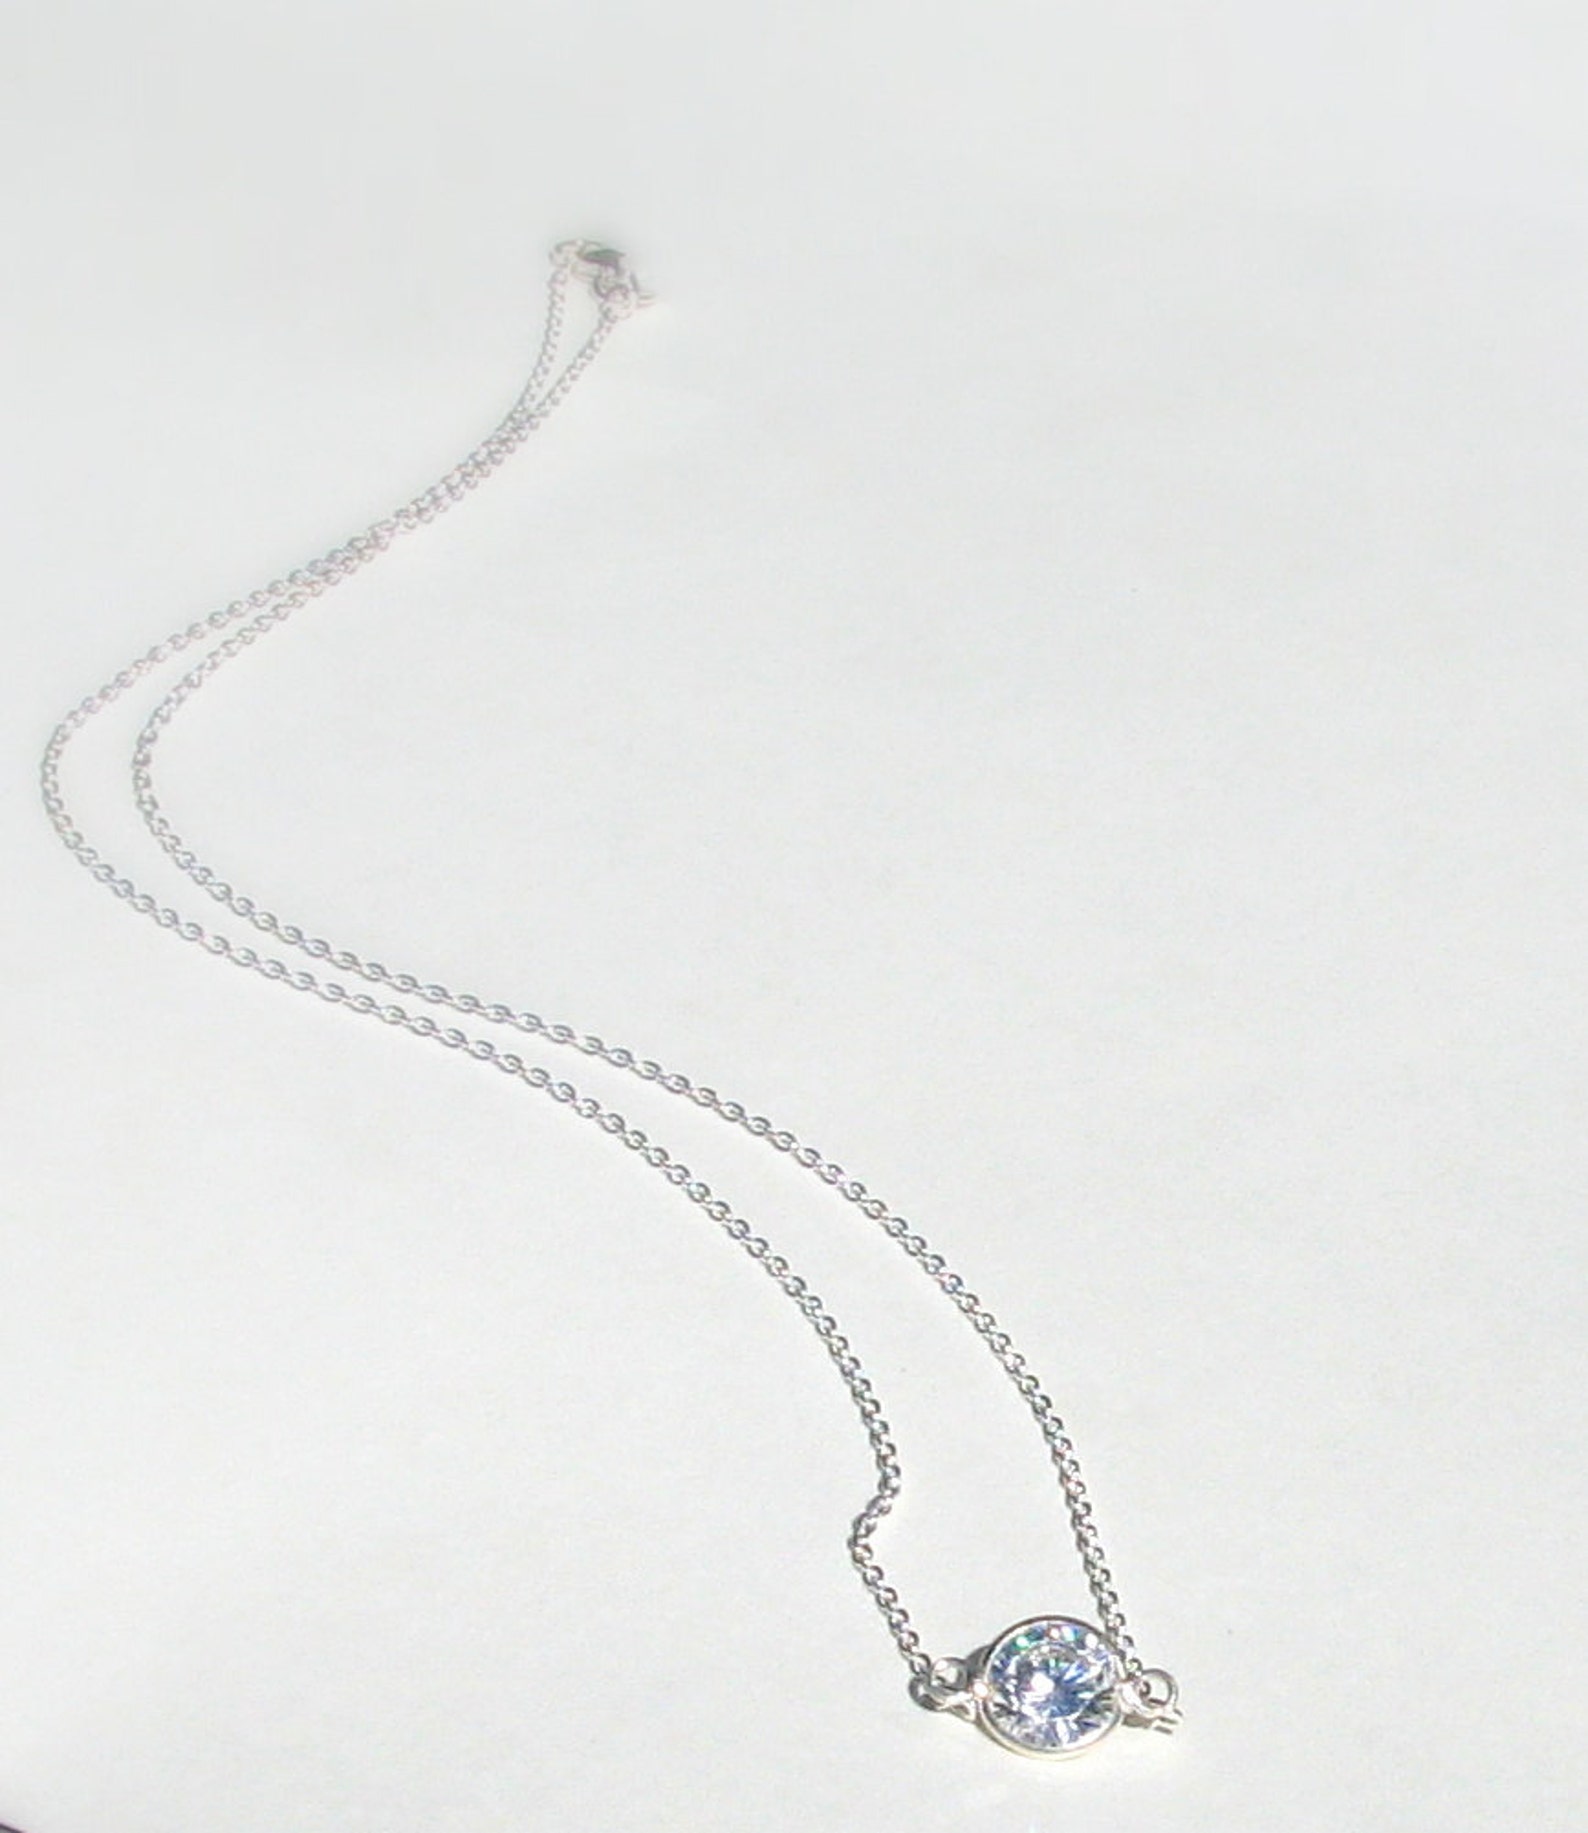 Floating Diamond Necklace Sterling Silver Cz Solitaire Etsy